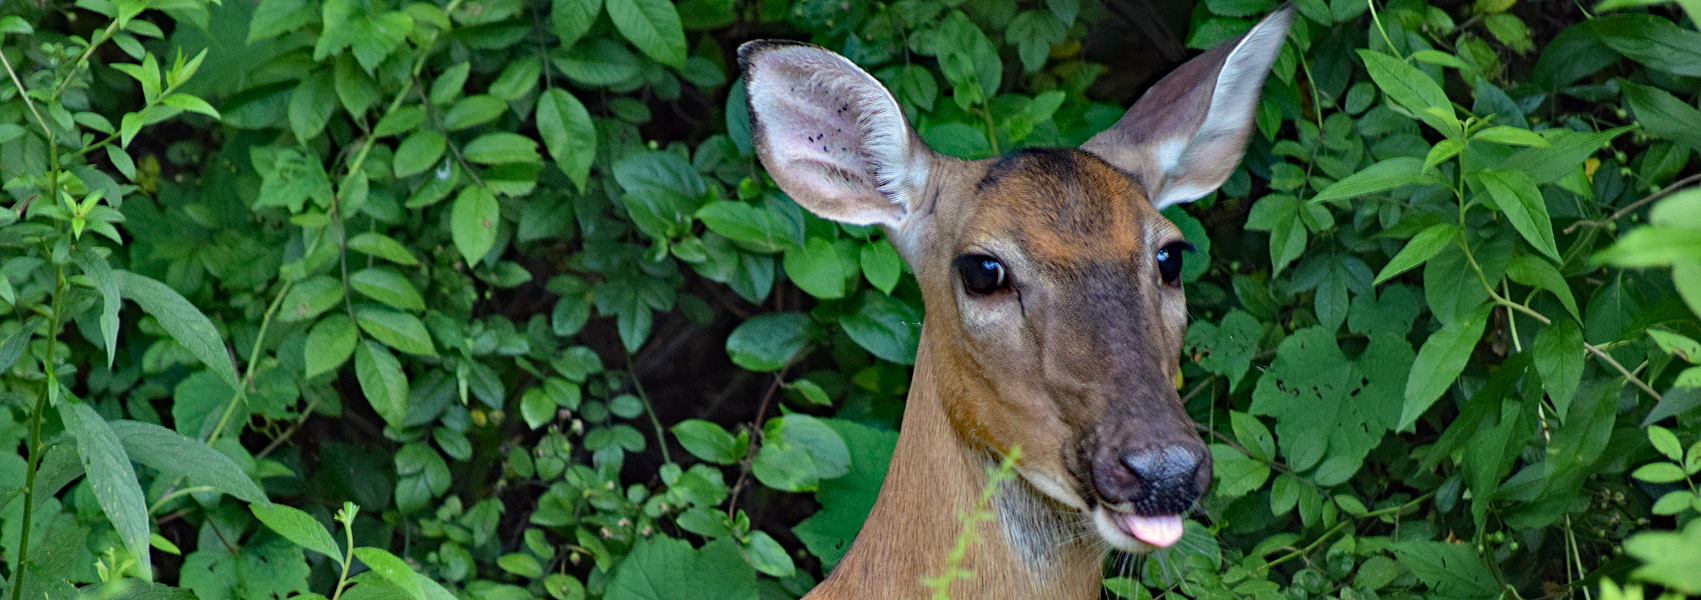 Deer with tongue sticking out